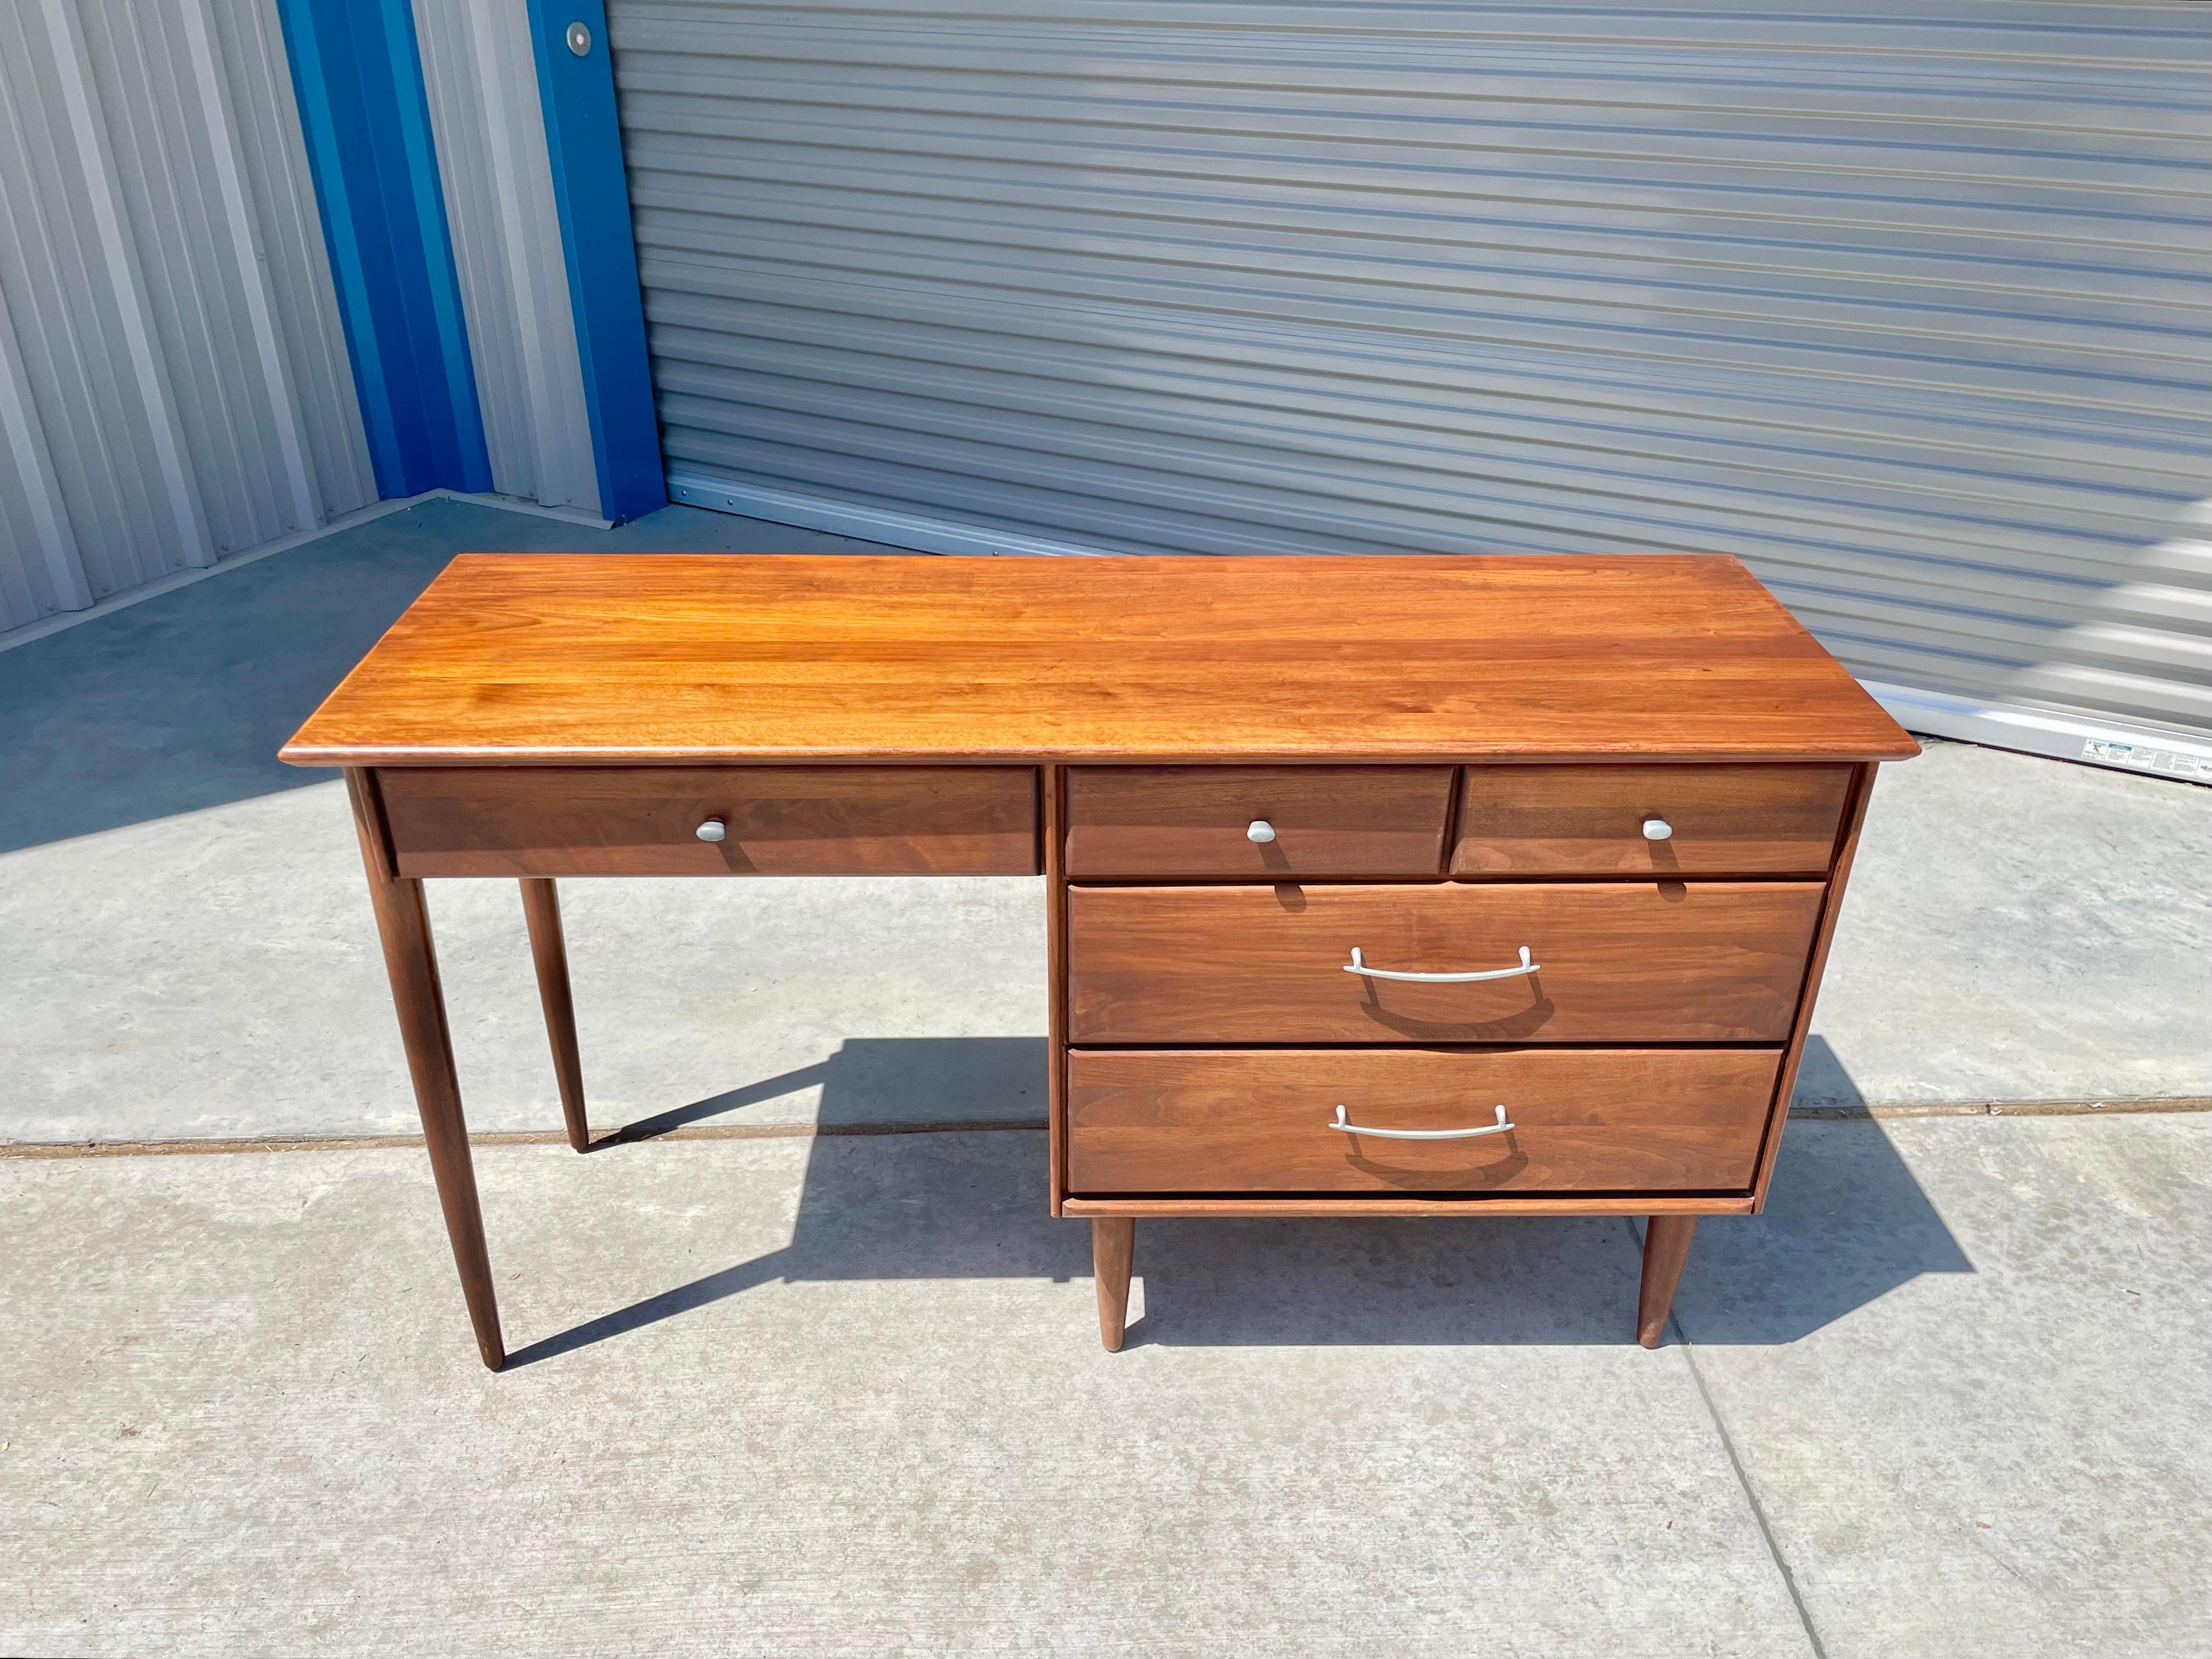 Mid-century walnut desk designed and manufactured by ACE-Hi in the United States circa 1960s. This beautiful writing desk features a walnut frame with five drawers giving you plenty of storage space. The drawers also feature metal handles making it